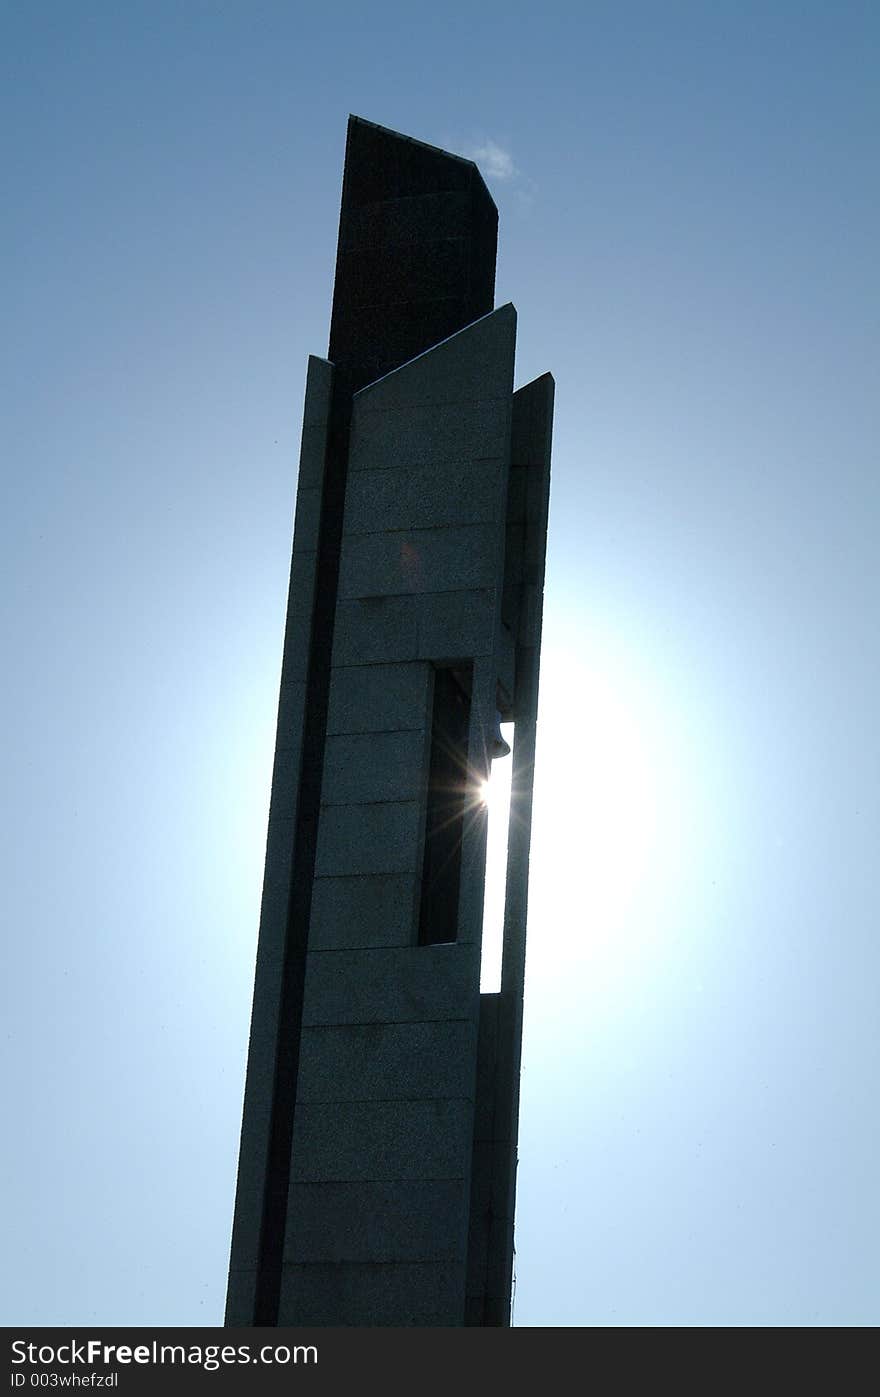 Image of a bell tower with the sun behind it, causing a sunburst effect as it shines through a gap in the building. Image of a bell tower with the sun behind it, causing a sunburst effect as it shines through a gap in the building.